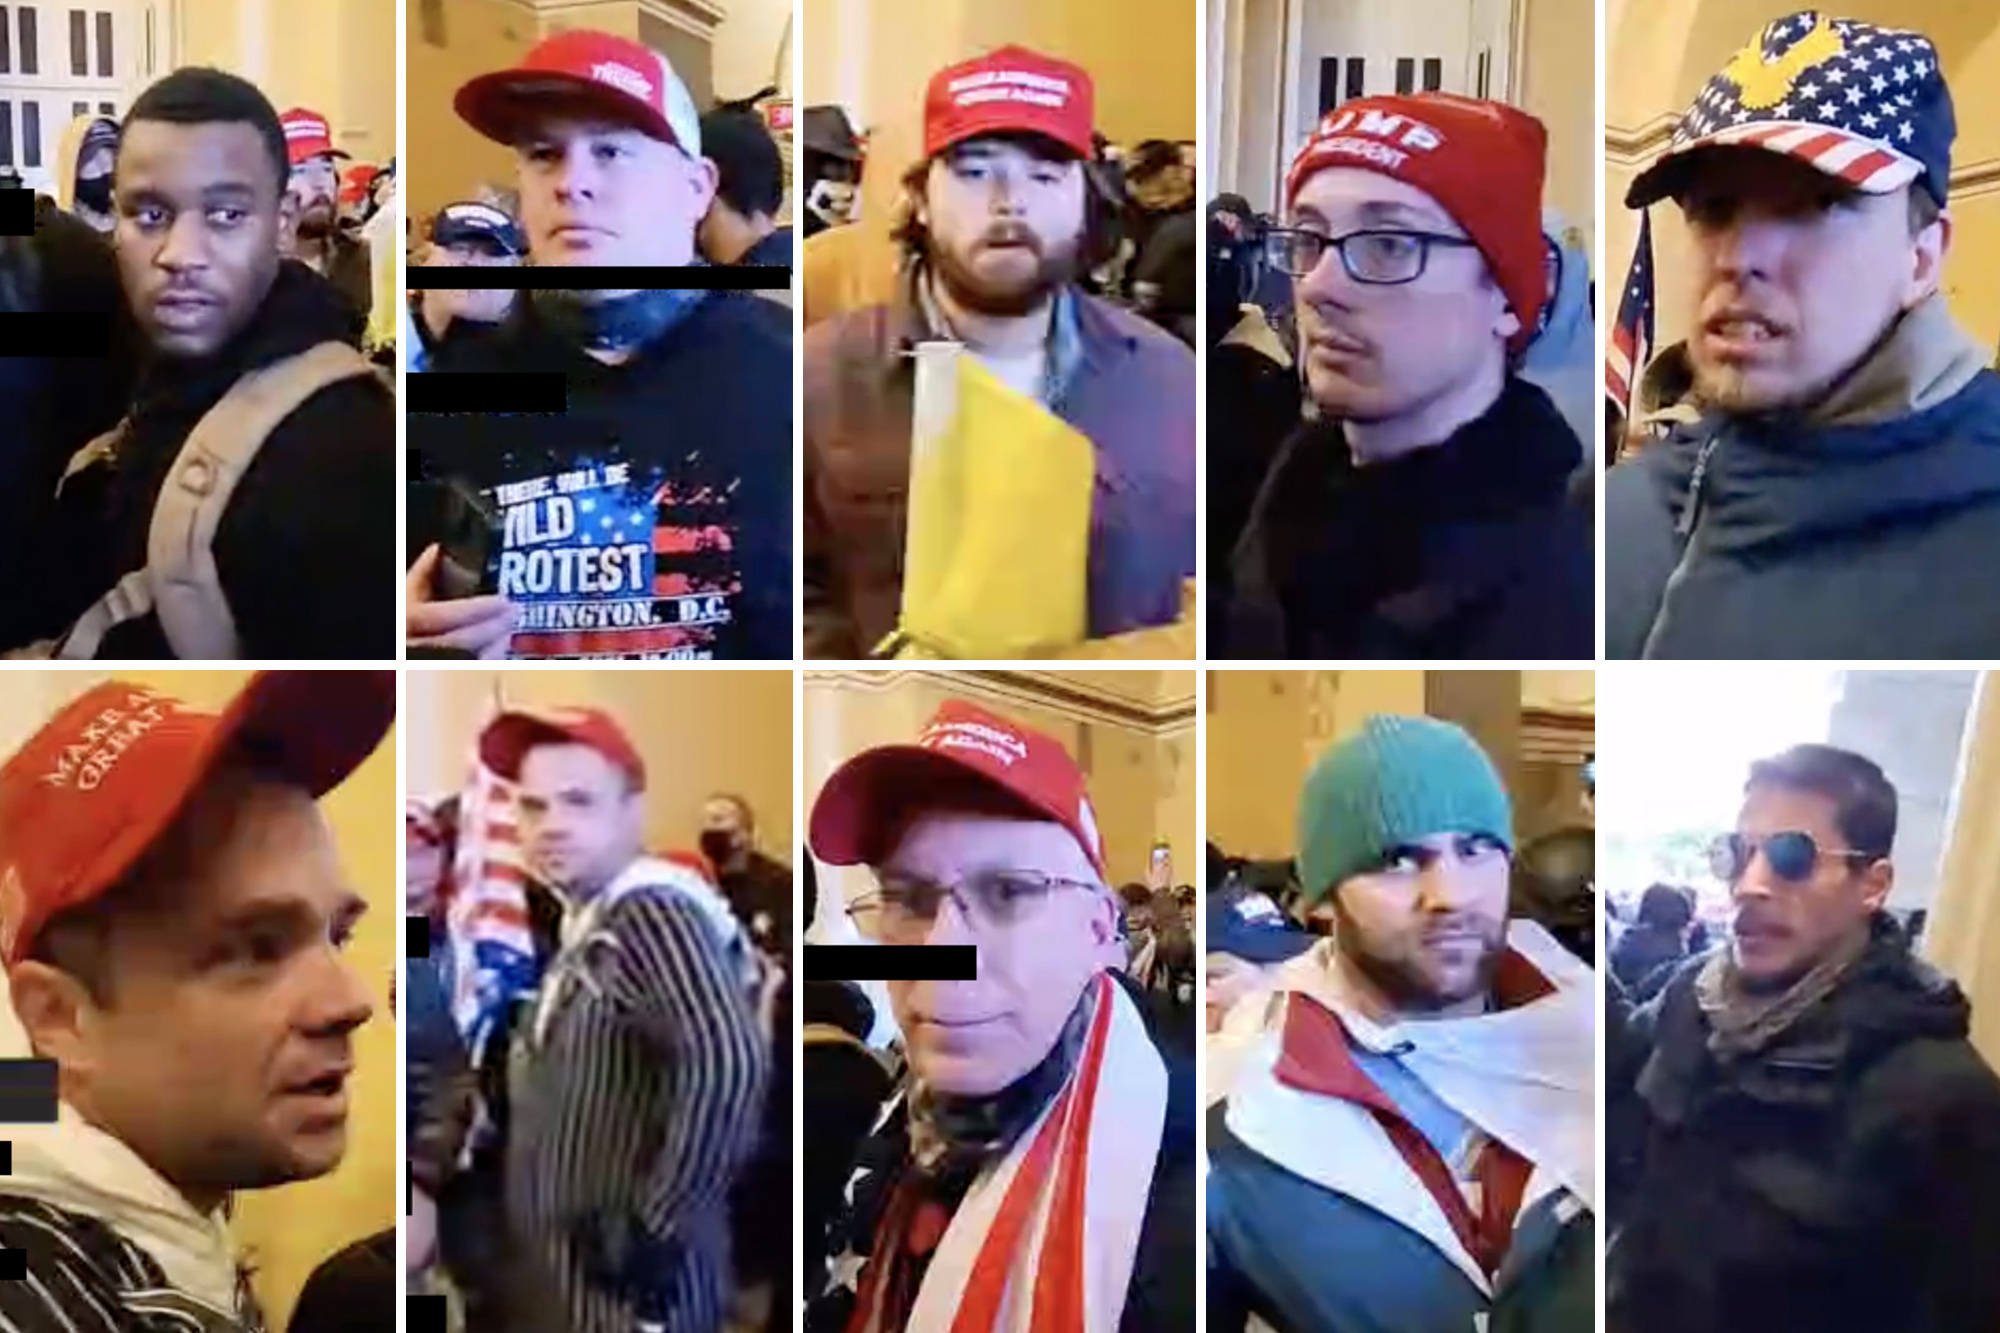 fbi-wanted-capitol-protesters.jpg